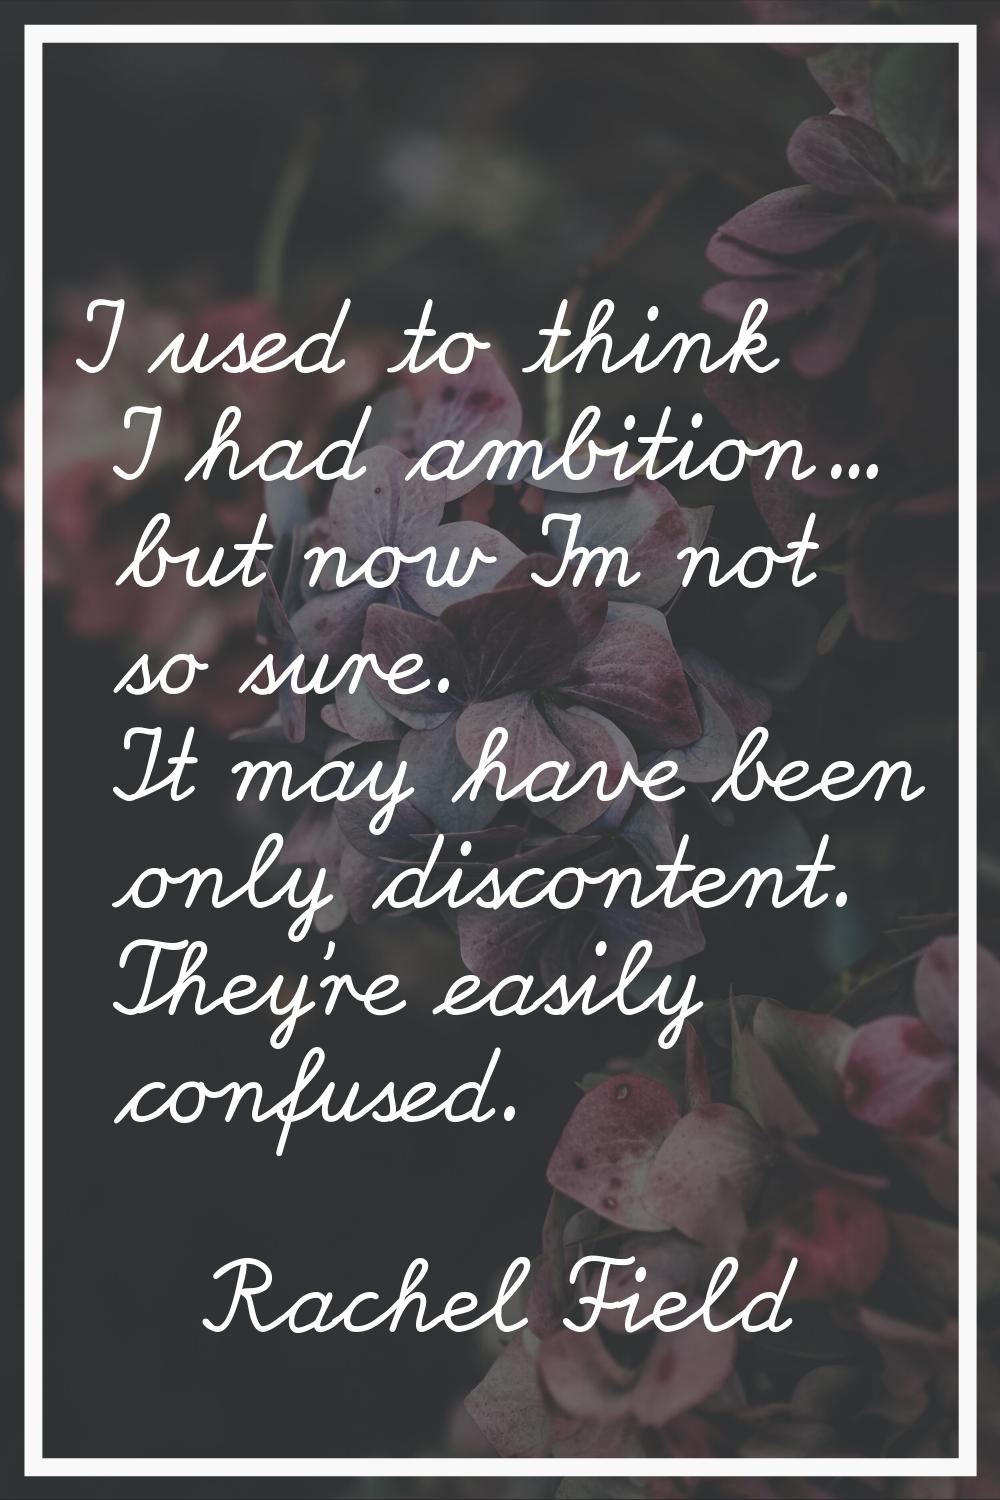 I used to think I had ambition... but now I'm not so sure. It may have been only discontent. They'r